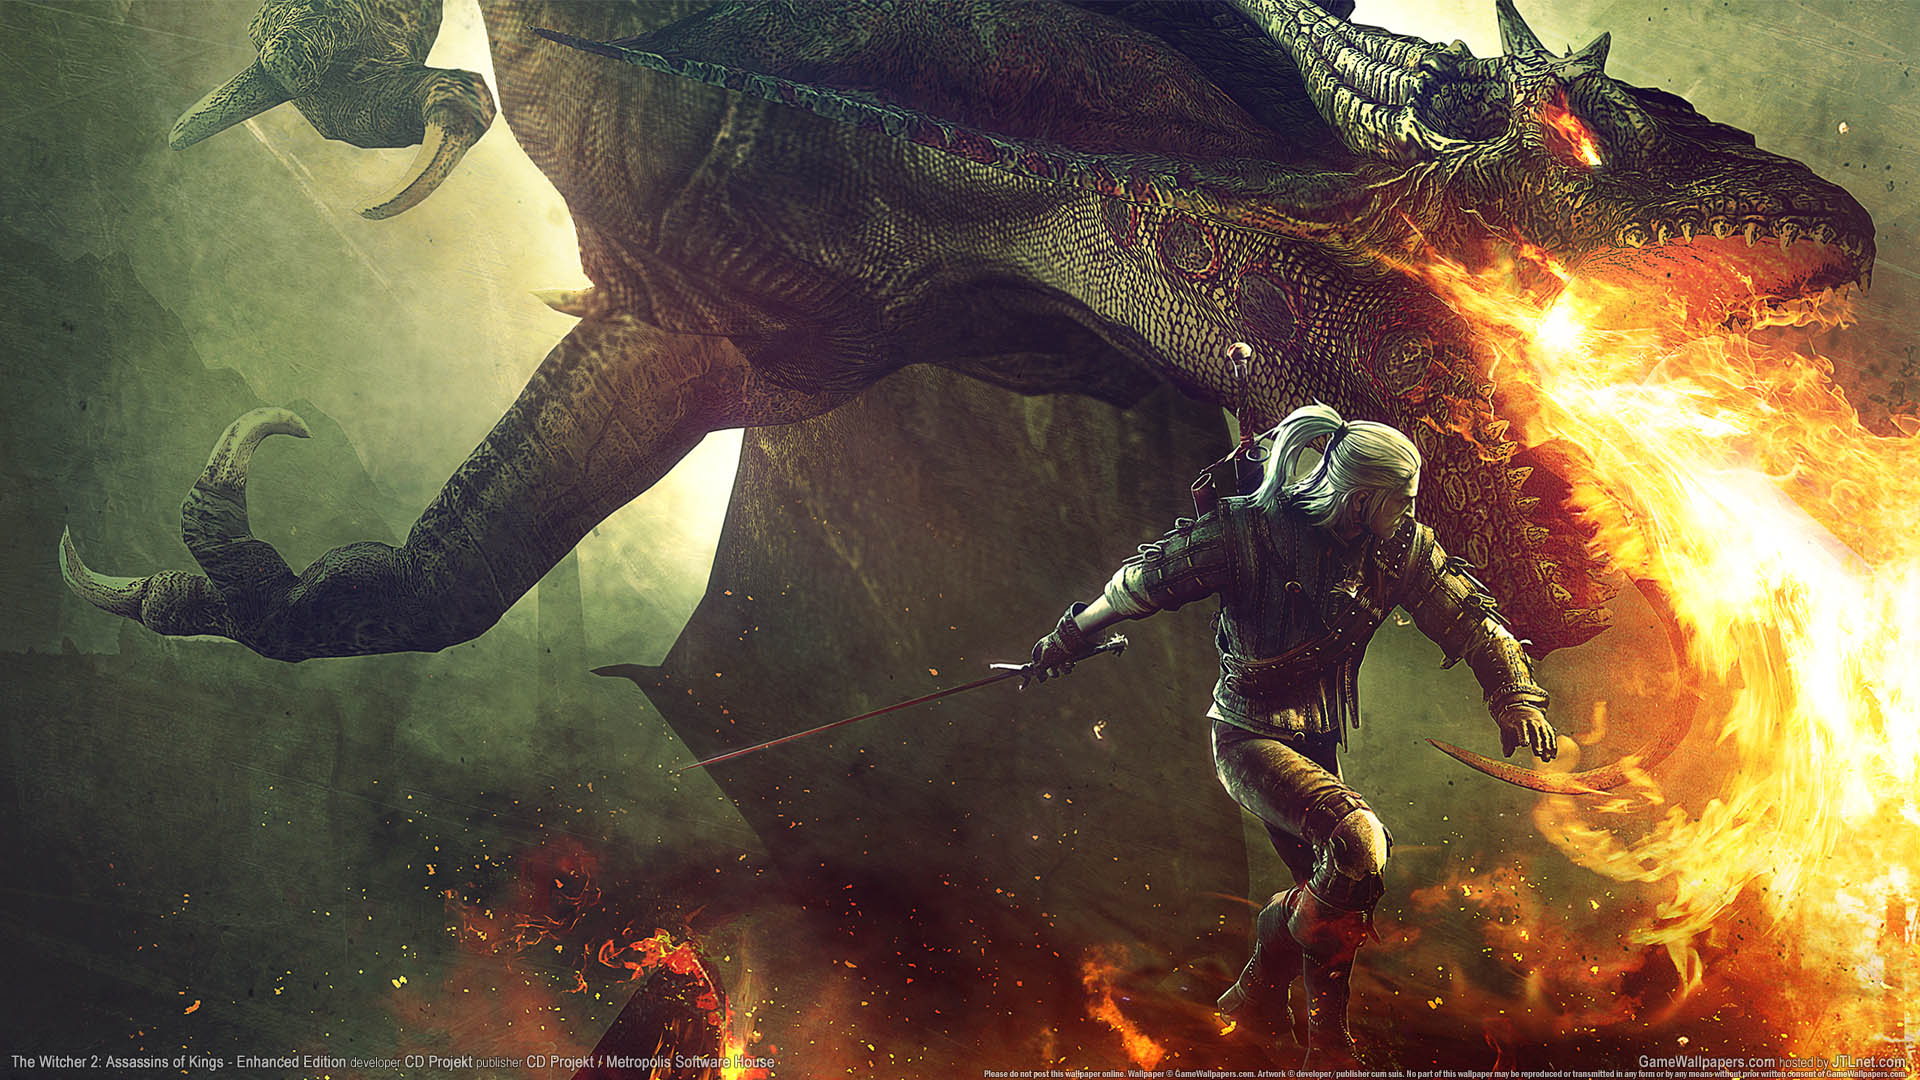 The Witcher 2: Assassins of Kings - Enhanced Edition achtergrond 01 1920x1080